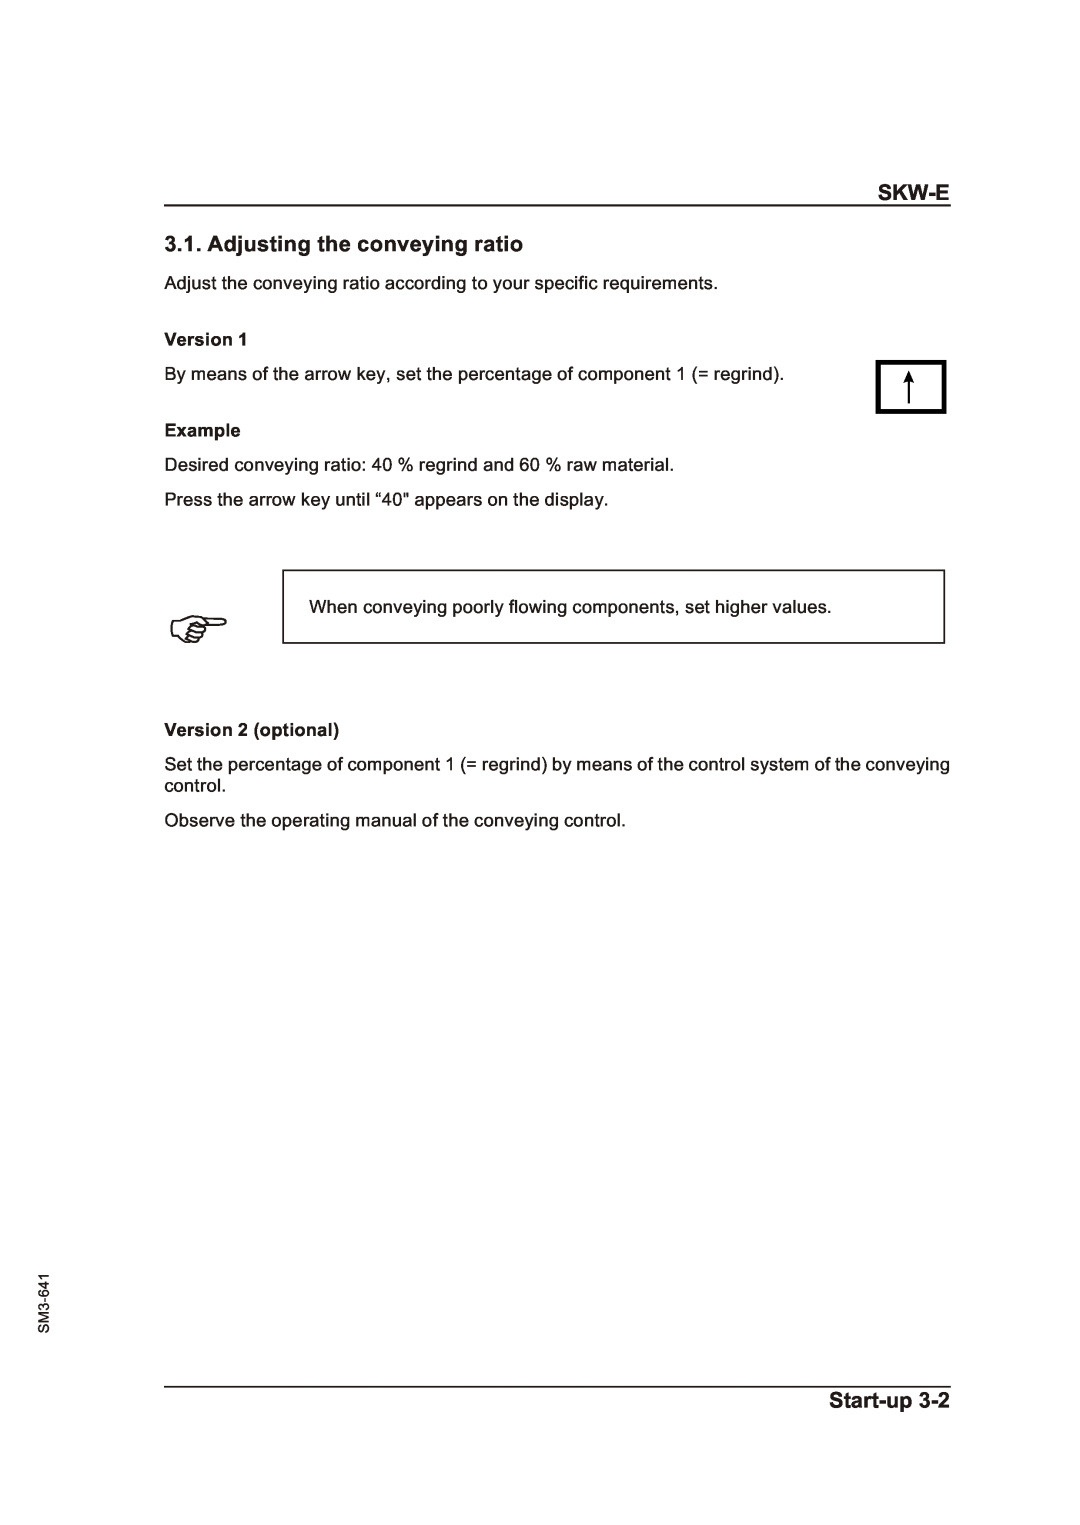 Sterling Plumbing manual SKW-E 3.1. Adjusting the conveying ratio, Start-up, Version 2 optional 